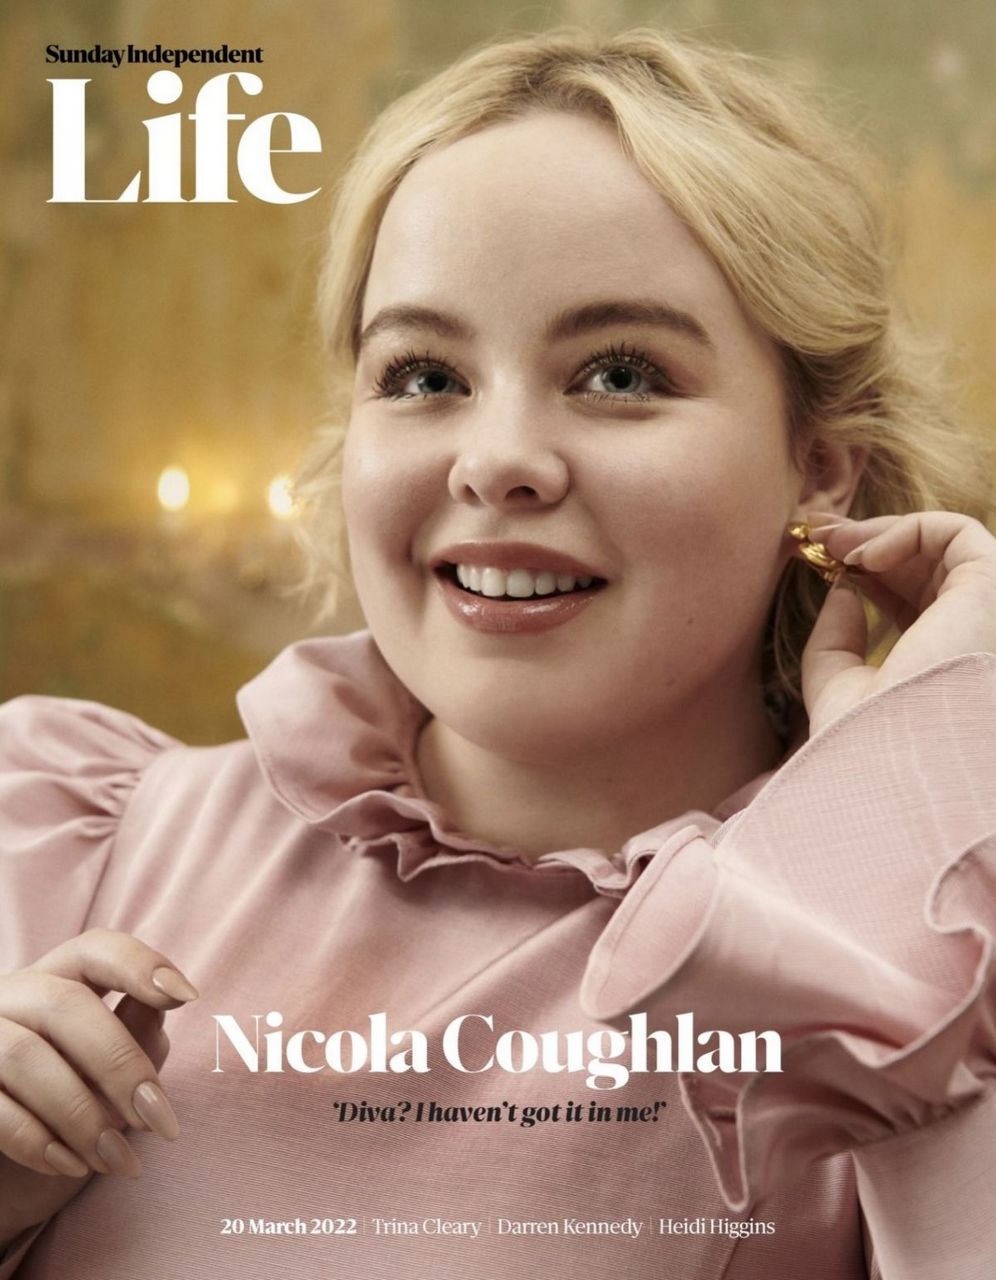 Nicole Coughlan For Sunday Independent Life March